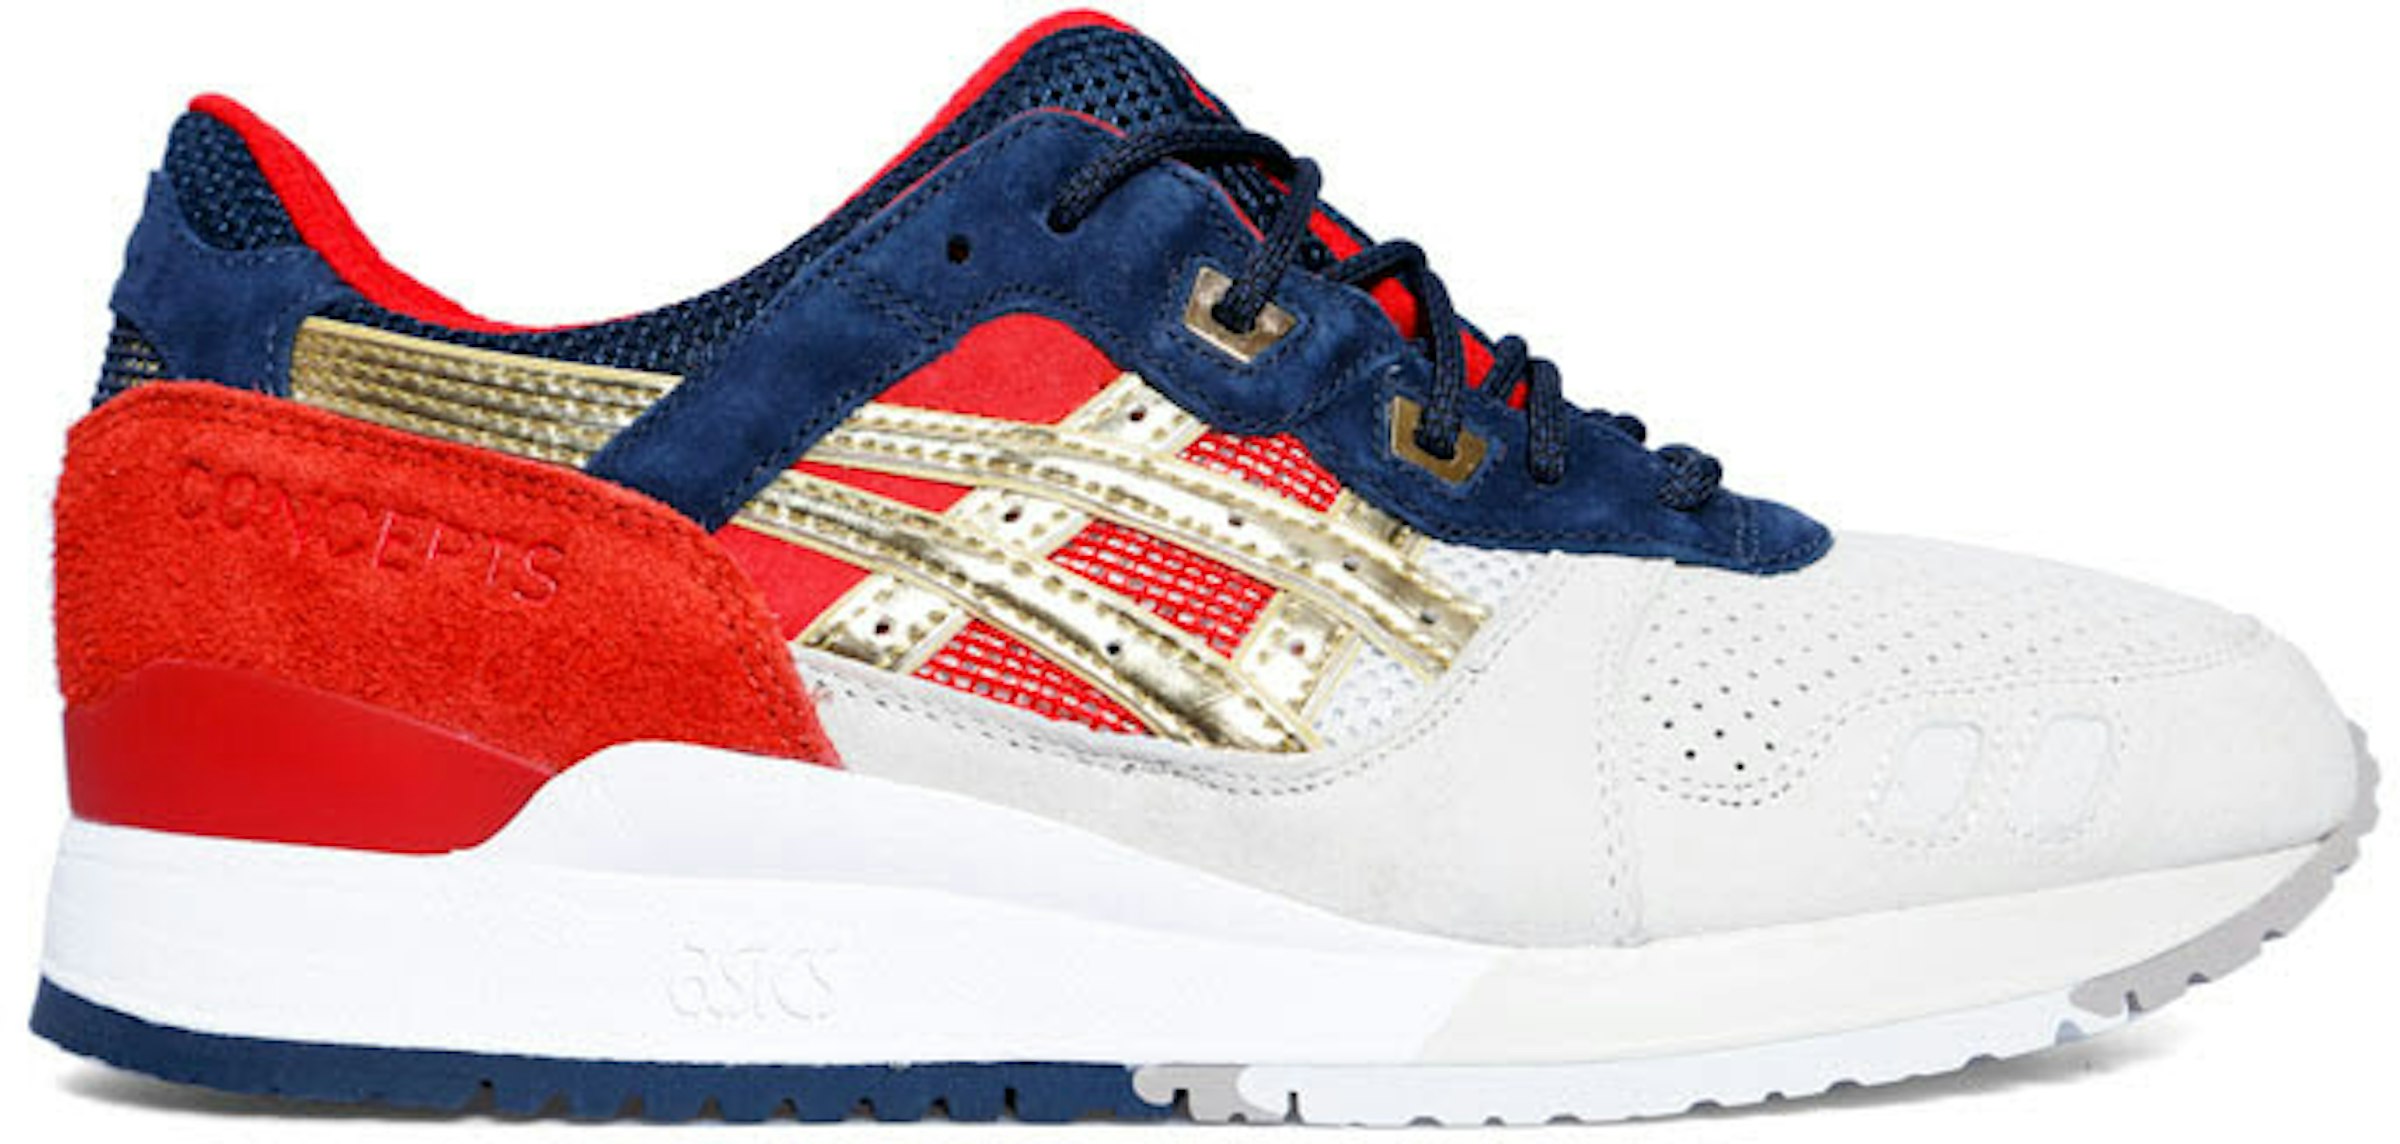 Monumentaal afstand Bot ASICS Gel-Lyte III Concepts Boston Tea Party Men's - H50TK-9394 - US